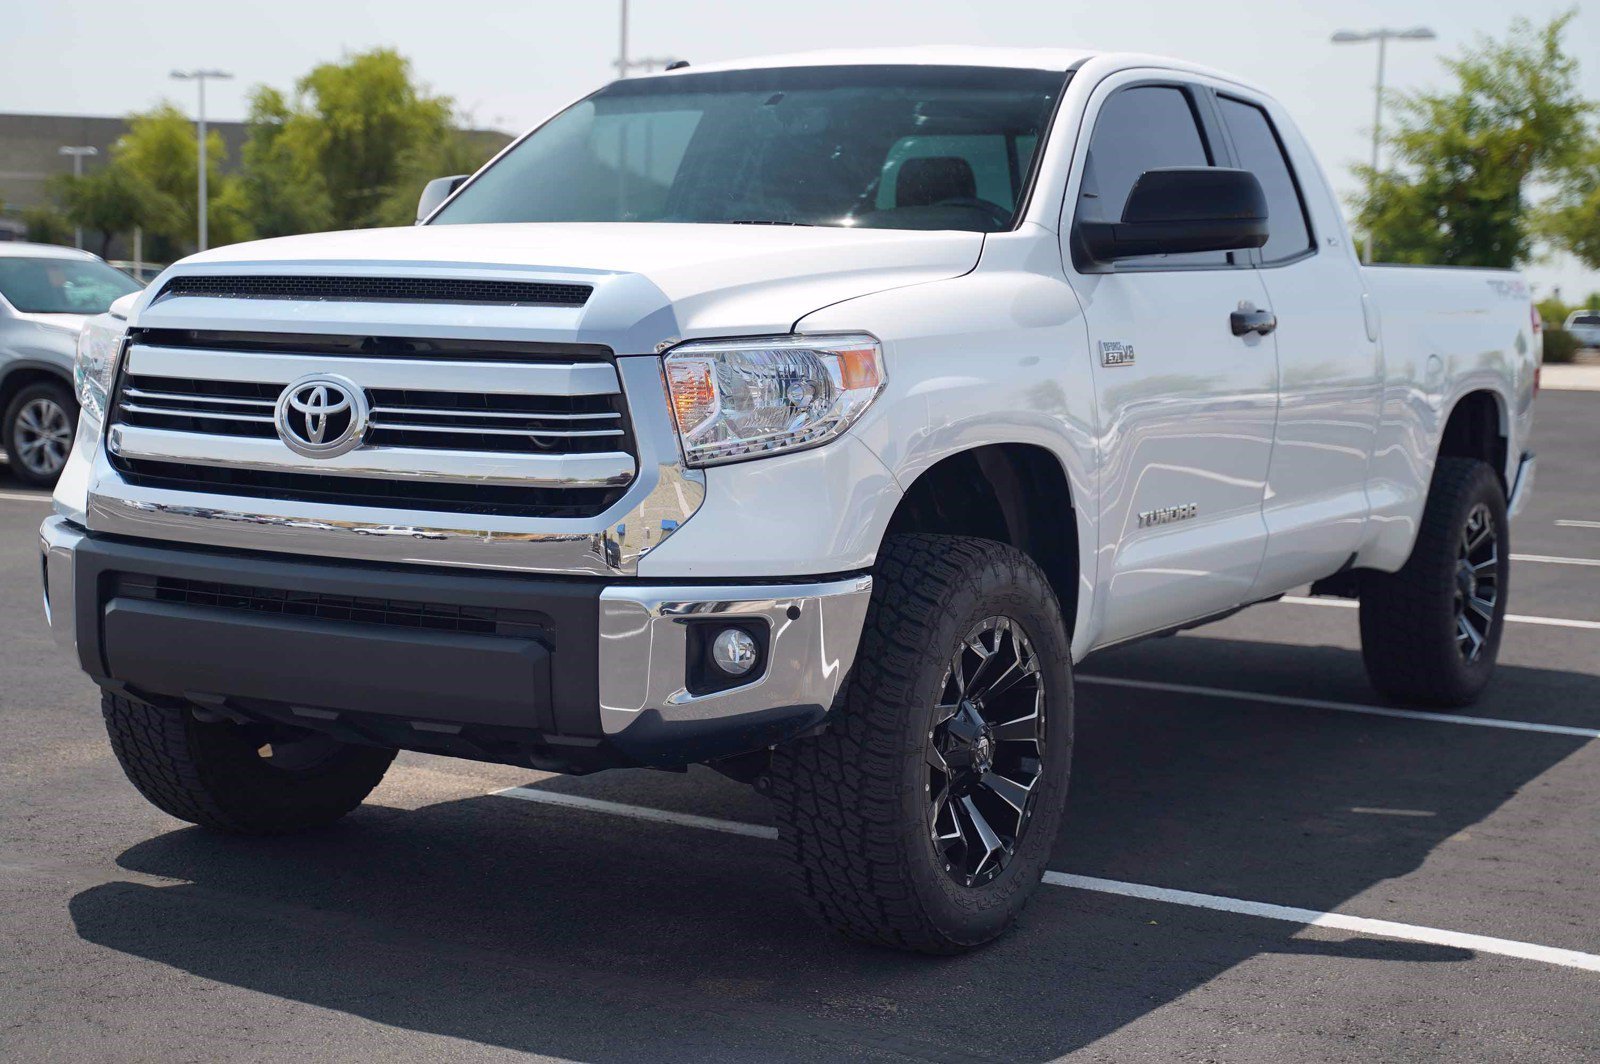 Certified Pre-Owned 2017 Toyota Tundra 4WD SR5 4WD Crew Cab Pickup